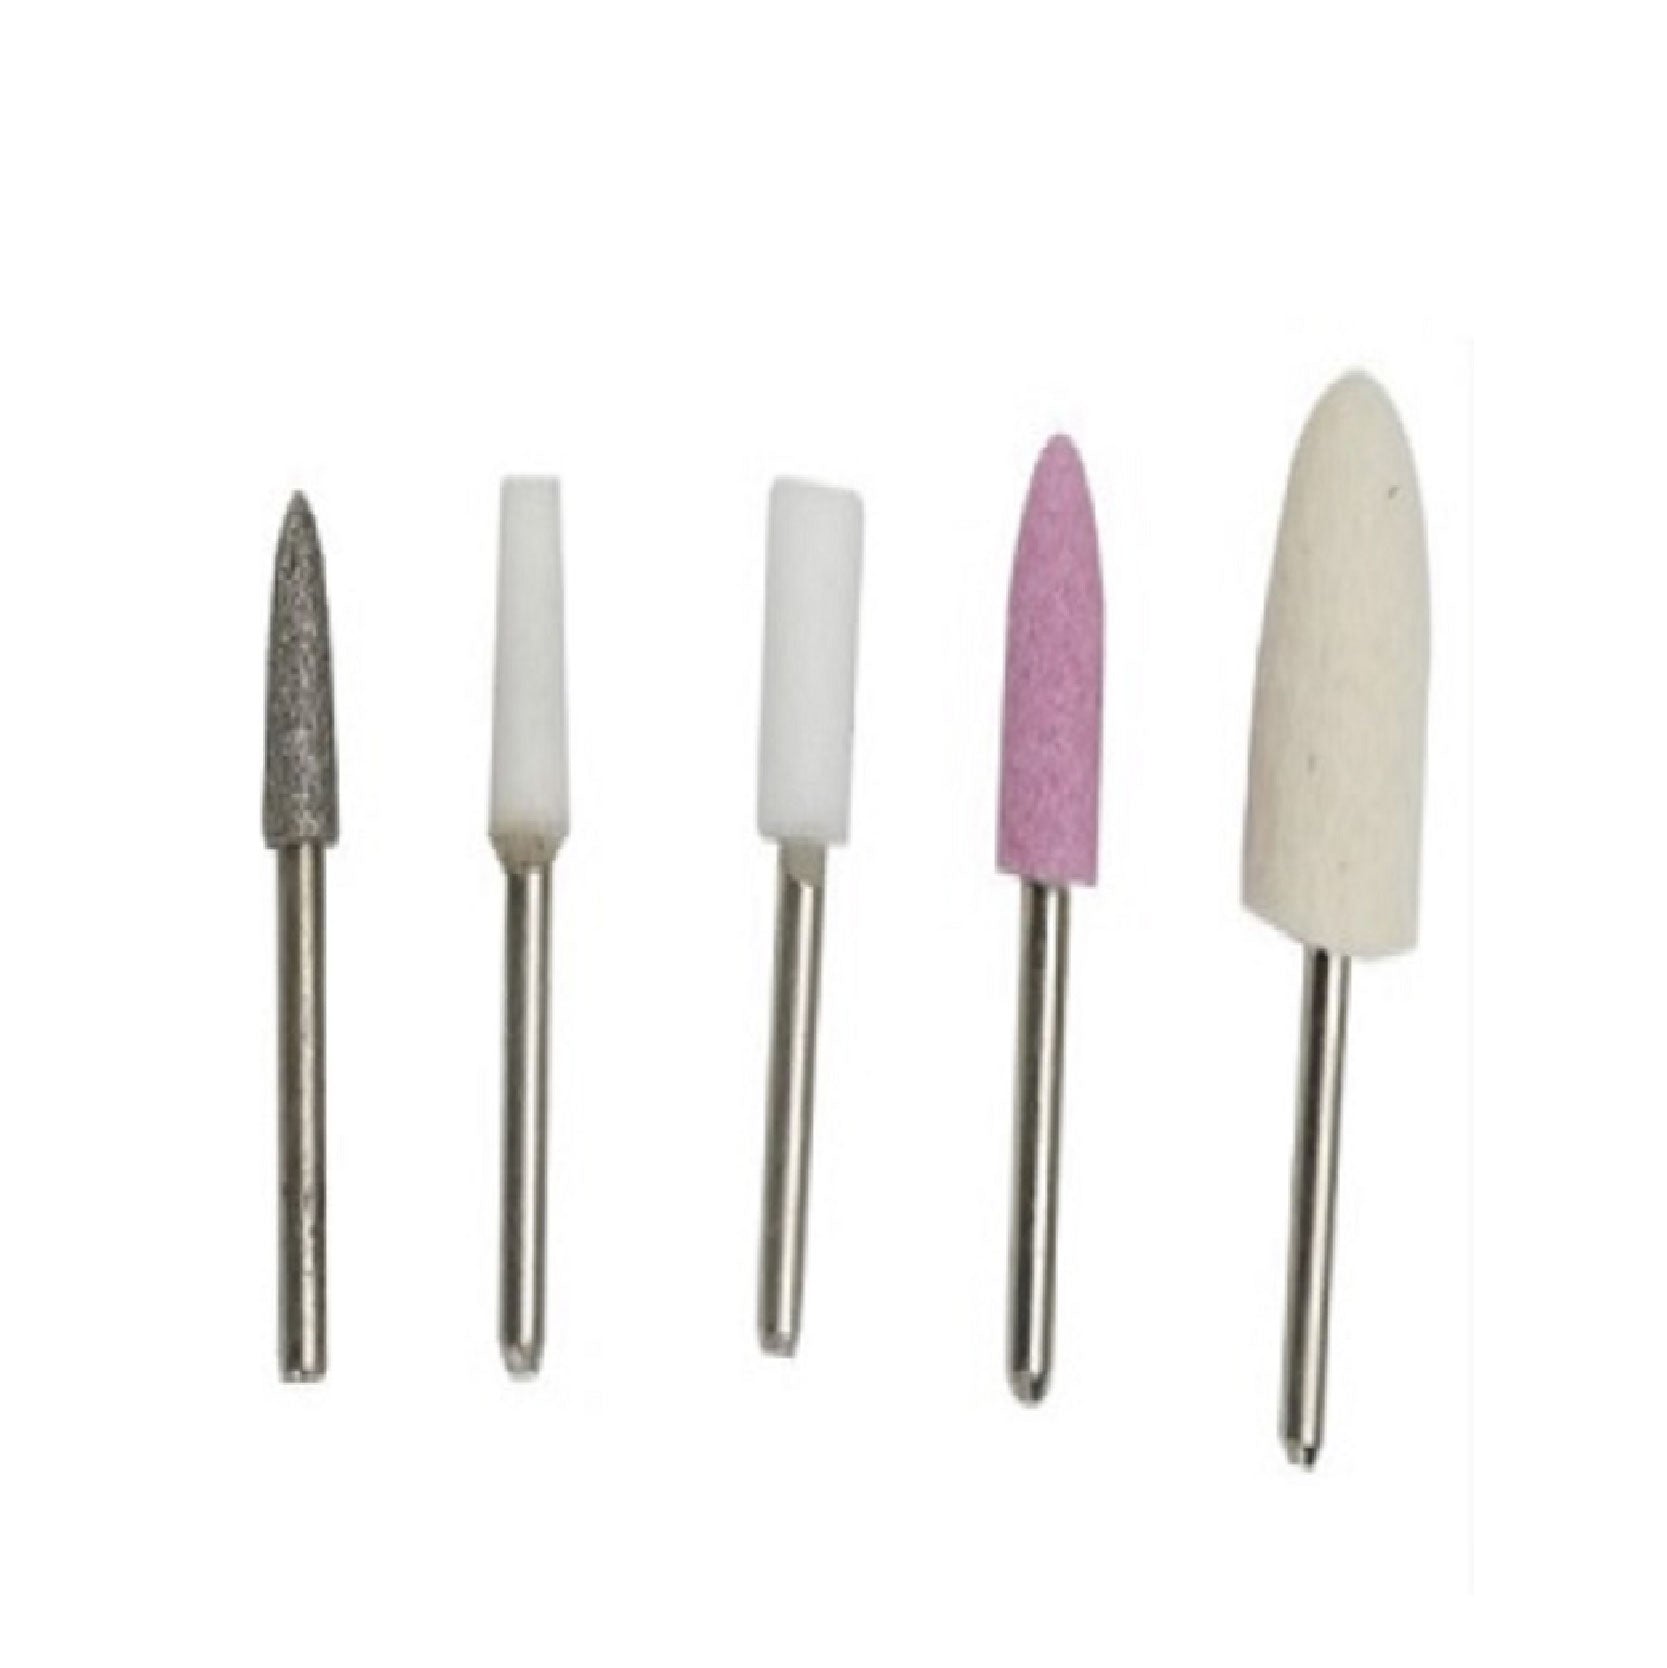 Miniso Nail Care System Replacement Accessories?For Device Model Mp-6686? 0500020561